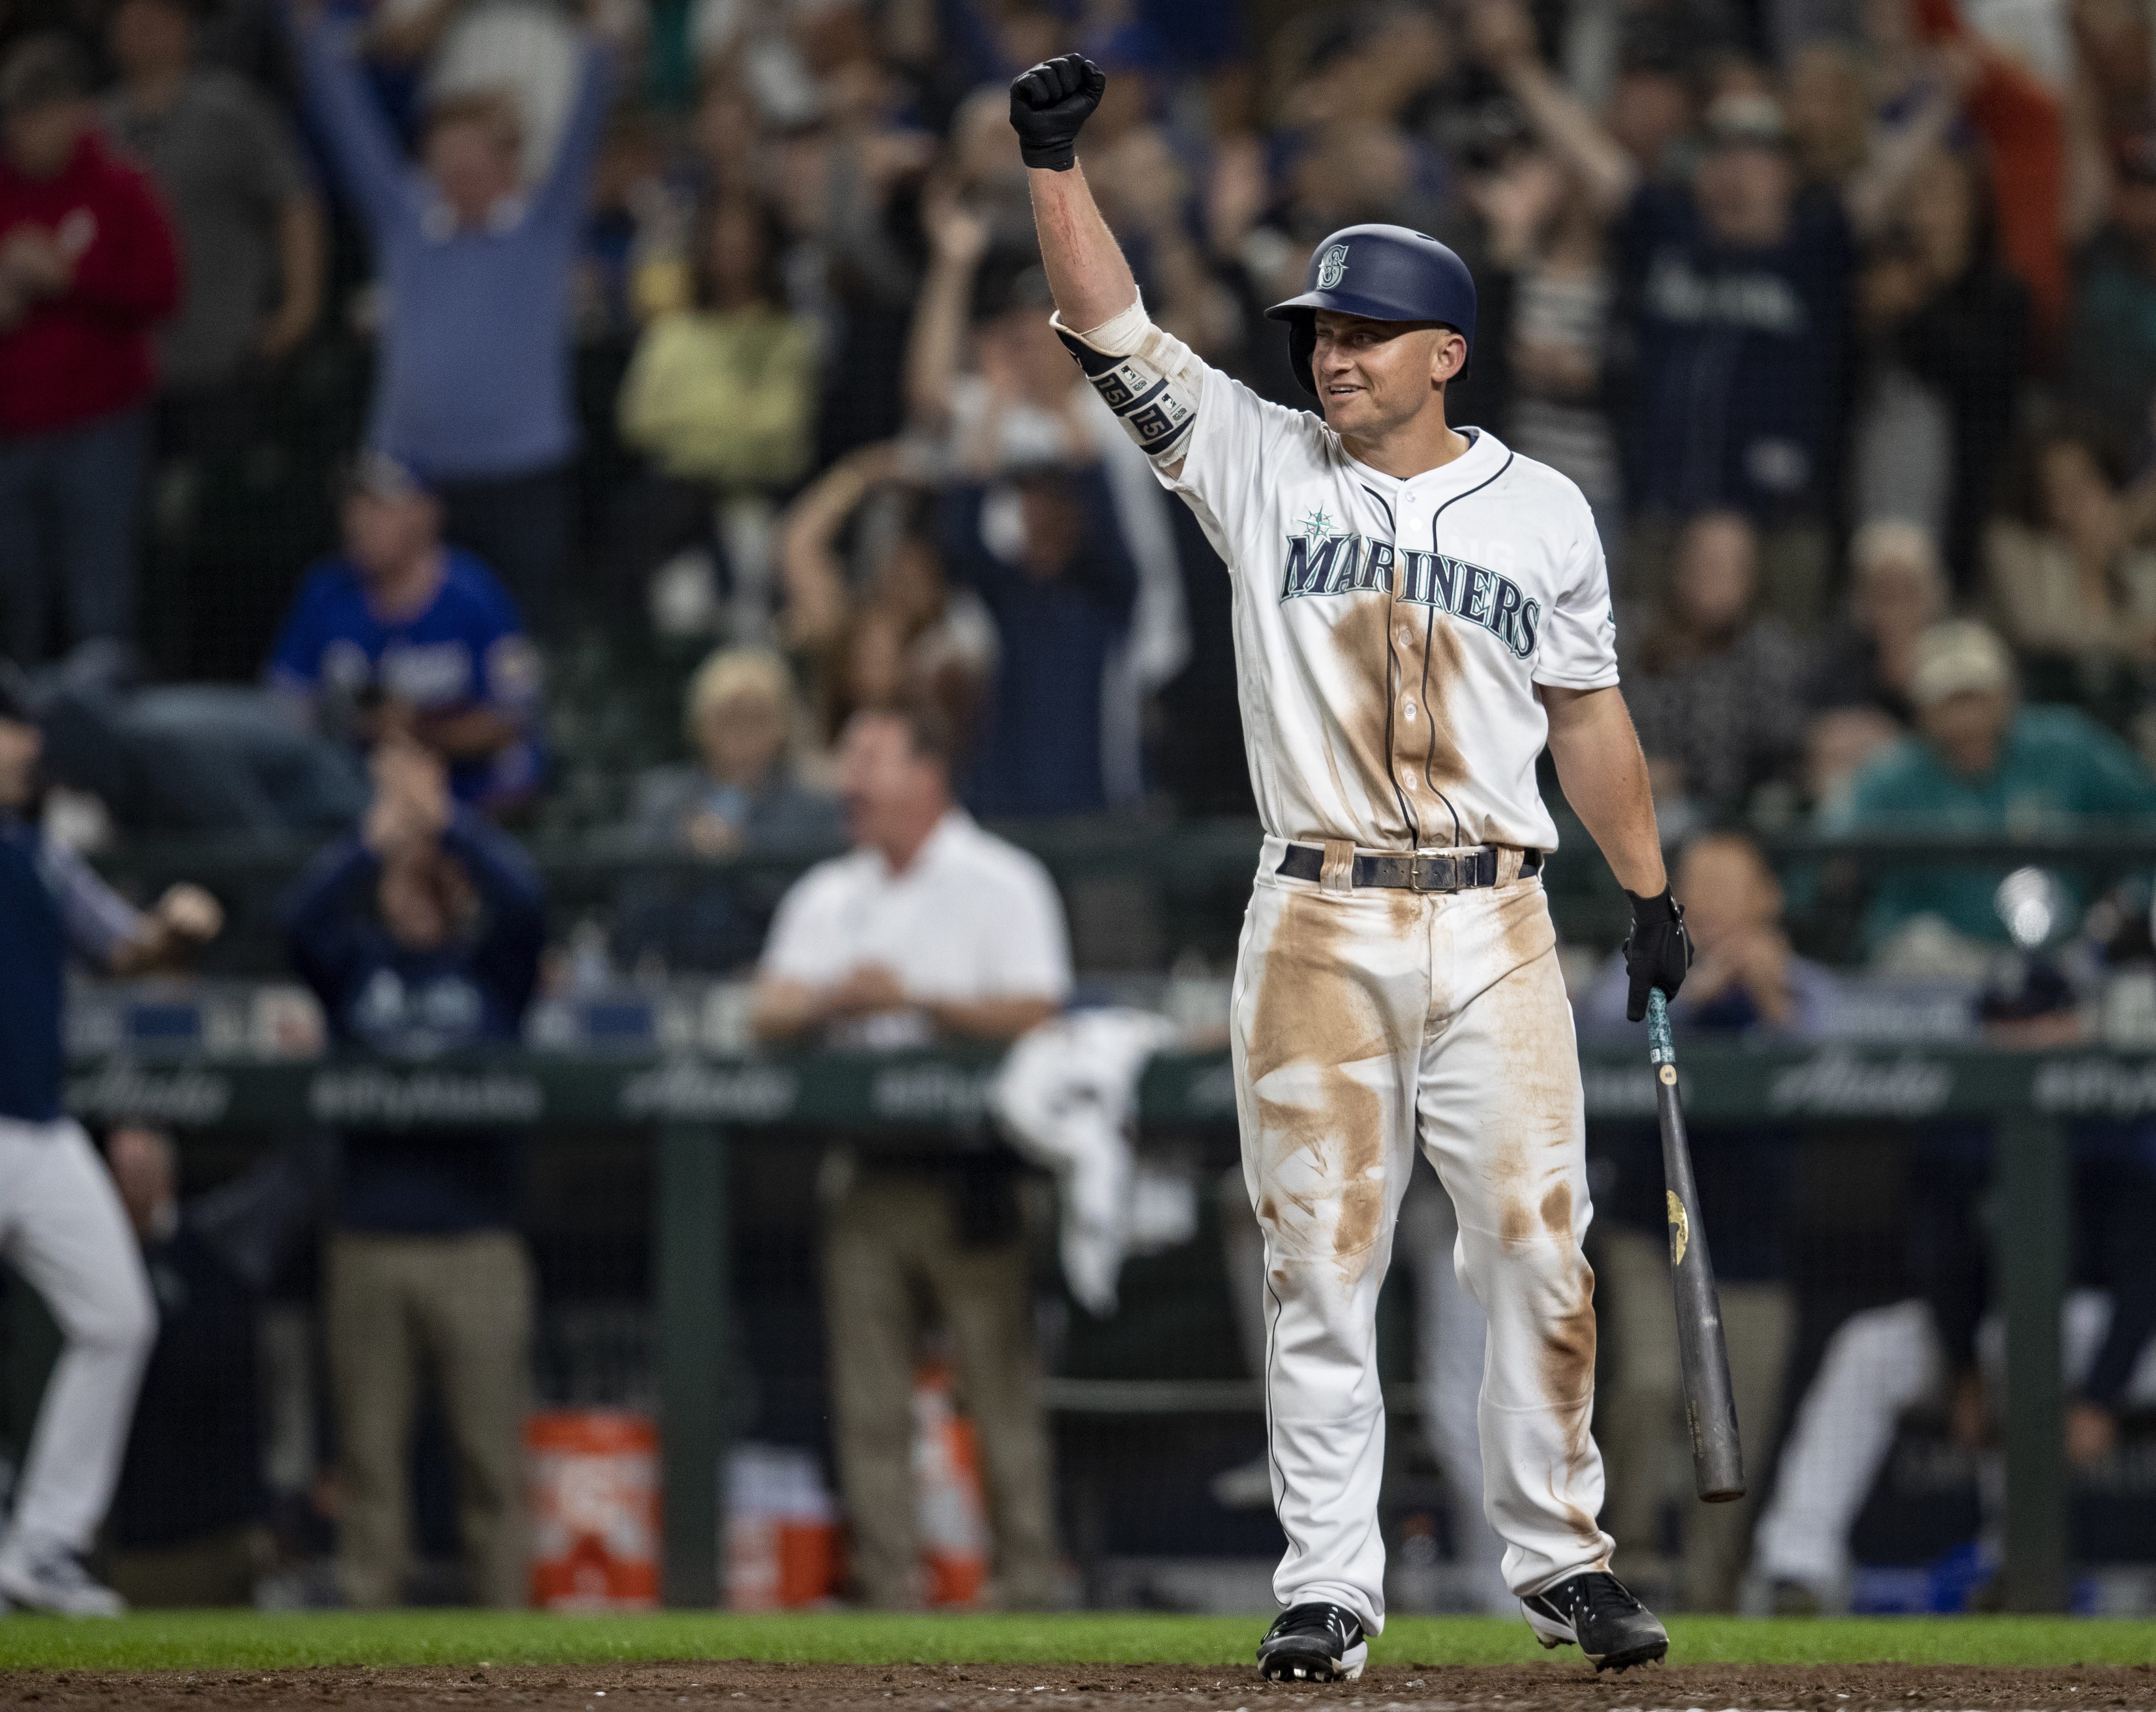 Seattle Mariners' Kyle Seager reacts after a balk was called on Los Angeles Dodgers relief pitcher Dylan Floro allowing Cameron Maybin to score from third base during the tenth inning of a baseball game, Saturday, Aug. 18, 2018, in Seattle. The Mariners won 5-4 in 10 innings.